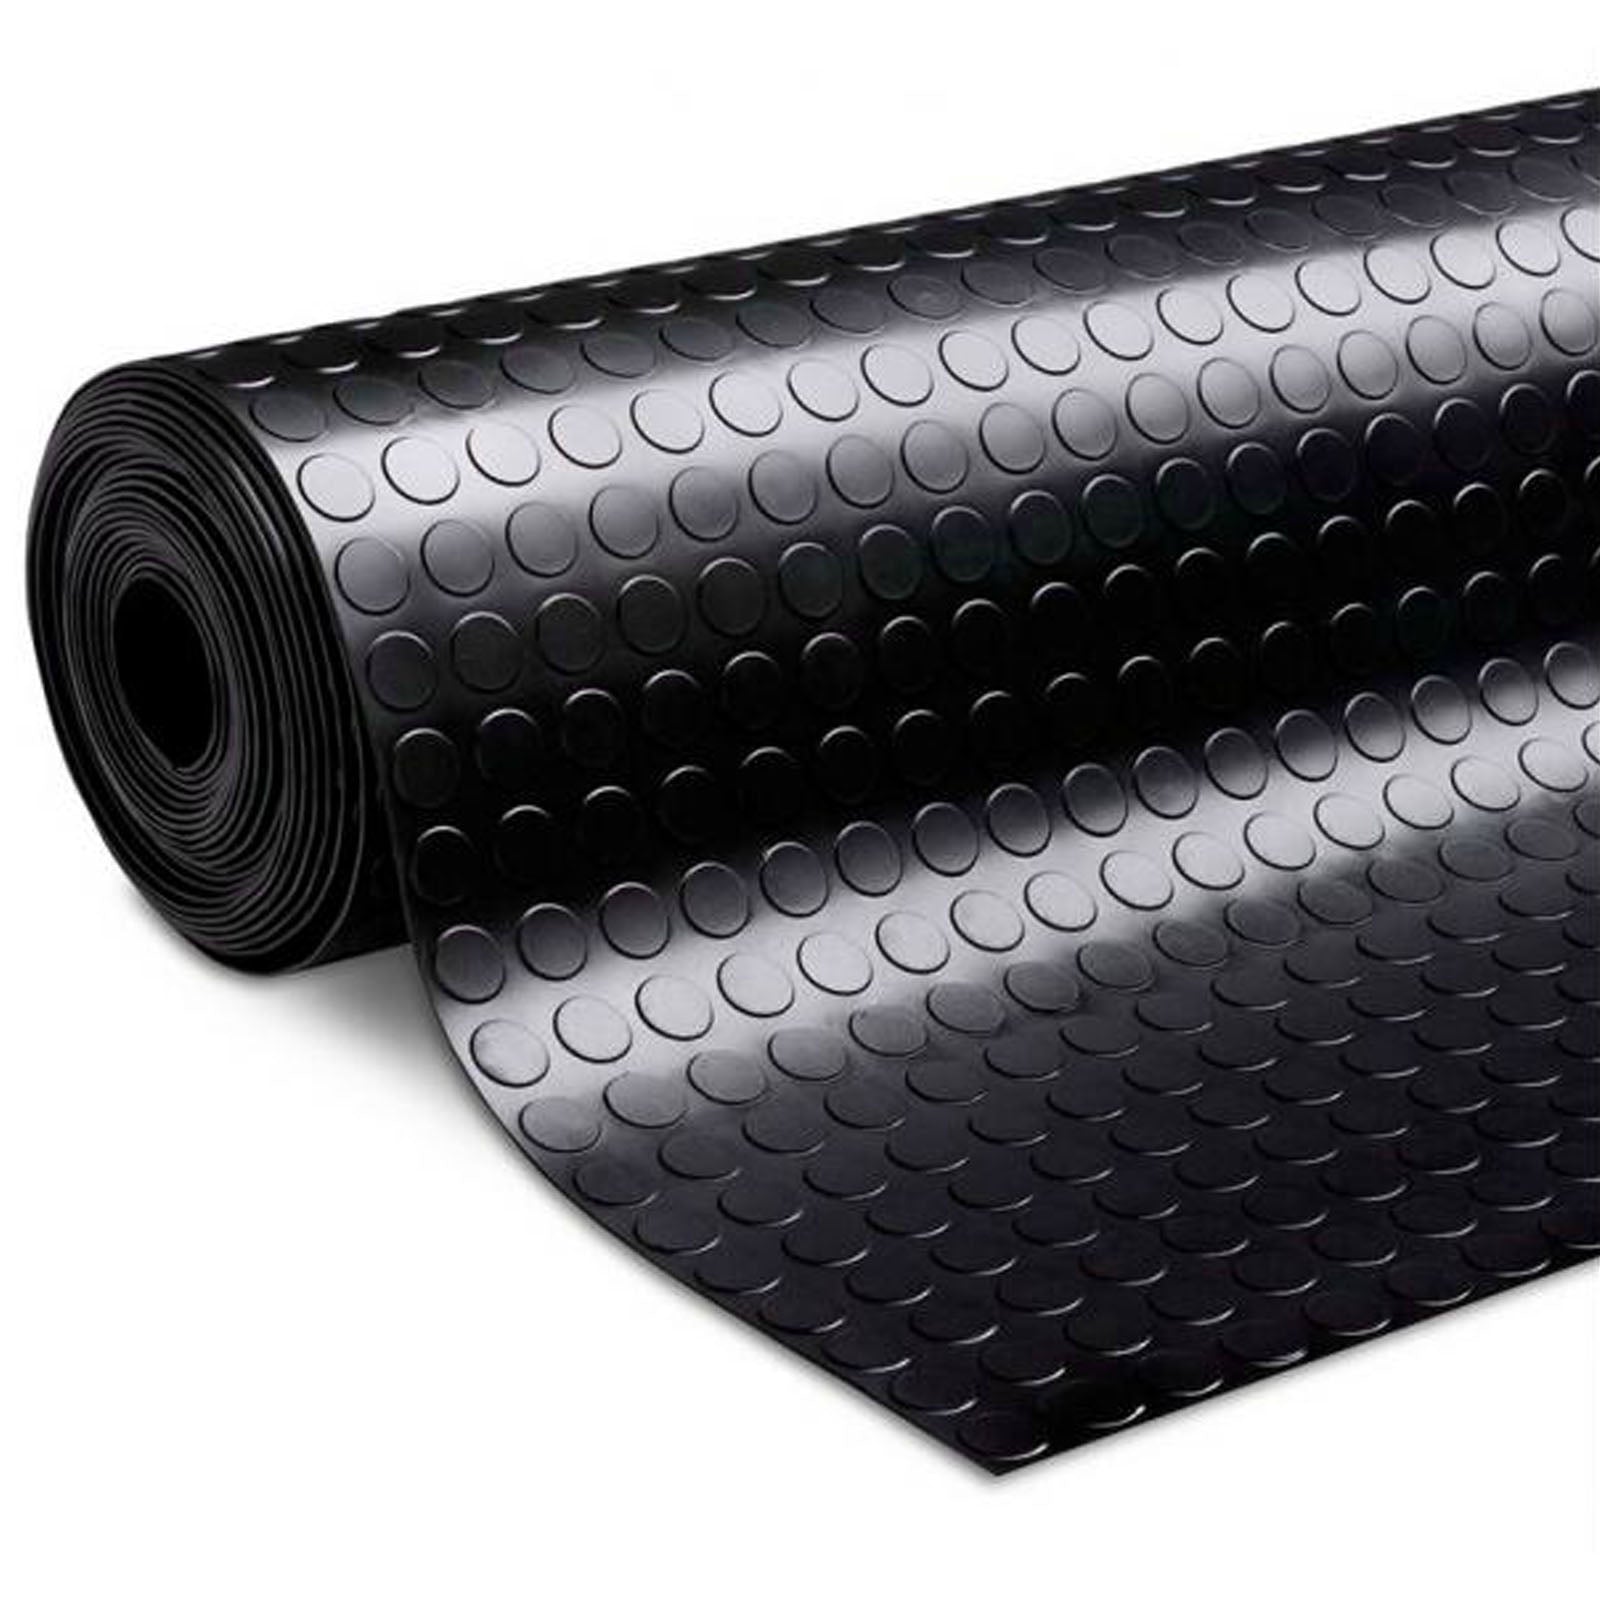 Heavyduty Rubber Mat for Playpens, Enclosures 1.6m x 1.6m